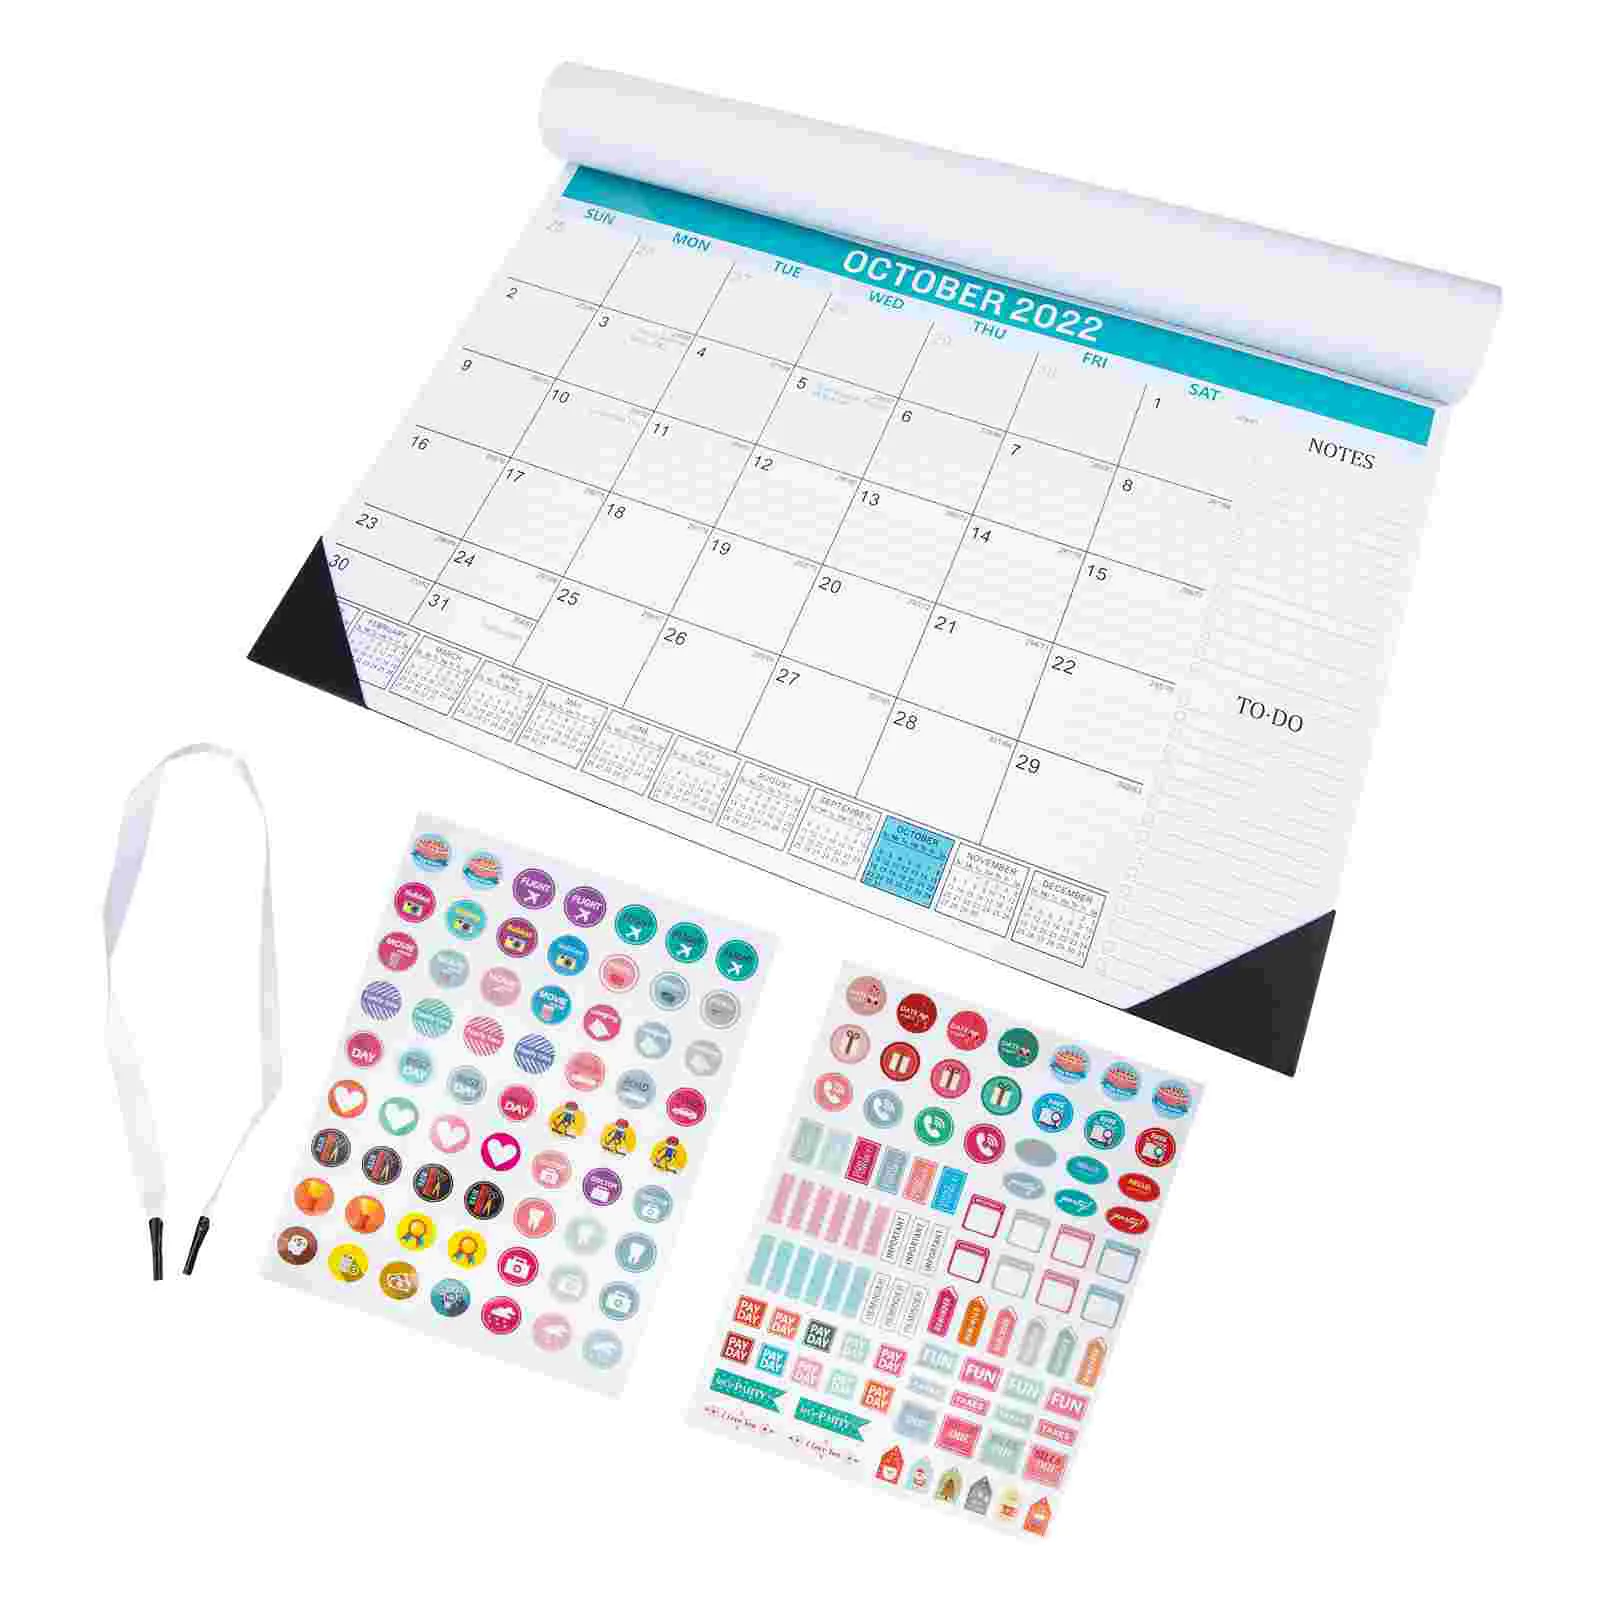 

Calendar Wall 2023 Planner Monthly Schedule Memo Office Hanging Month English Plan Poster Flipping Daily Yearly Agenda Calendars